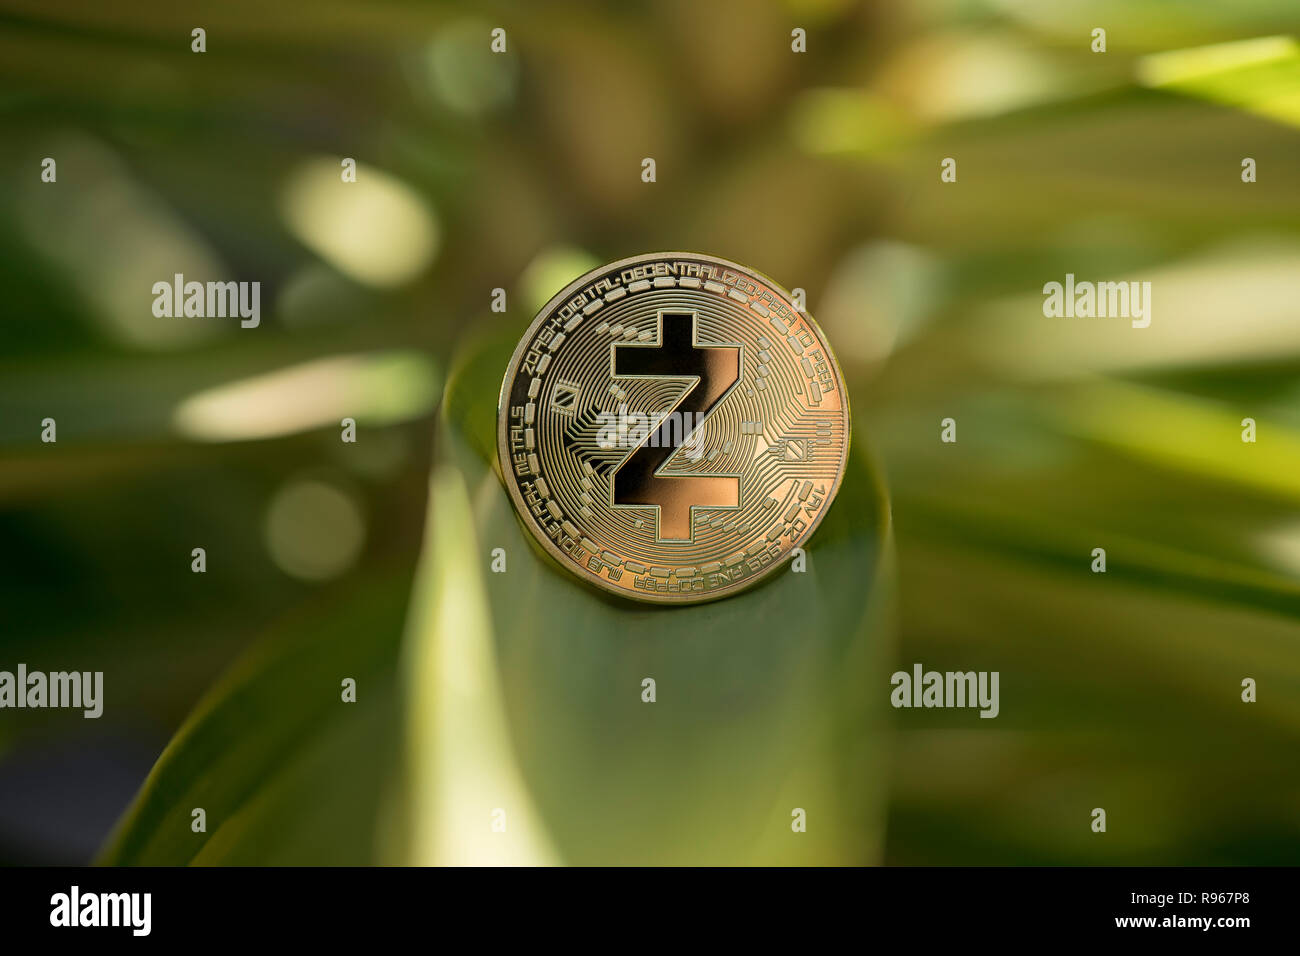 Z-Cash cryptocurrency physical coin placed on the plant leaf Stock Photo